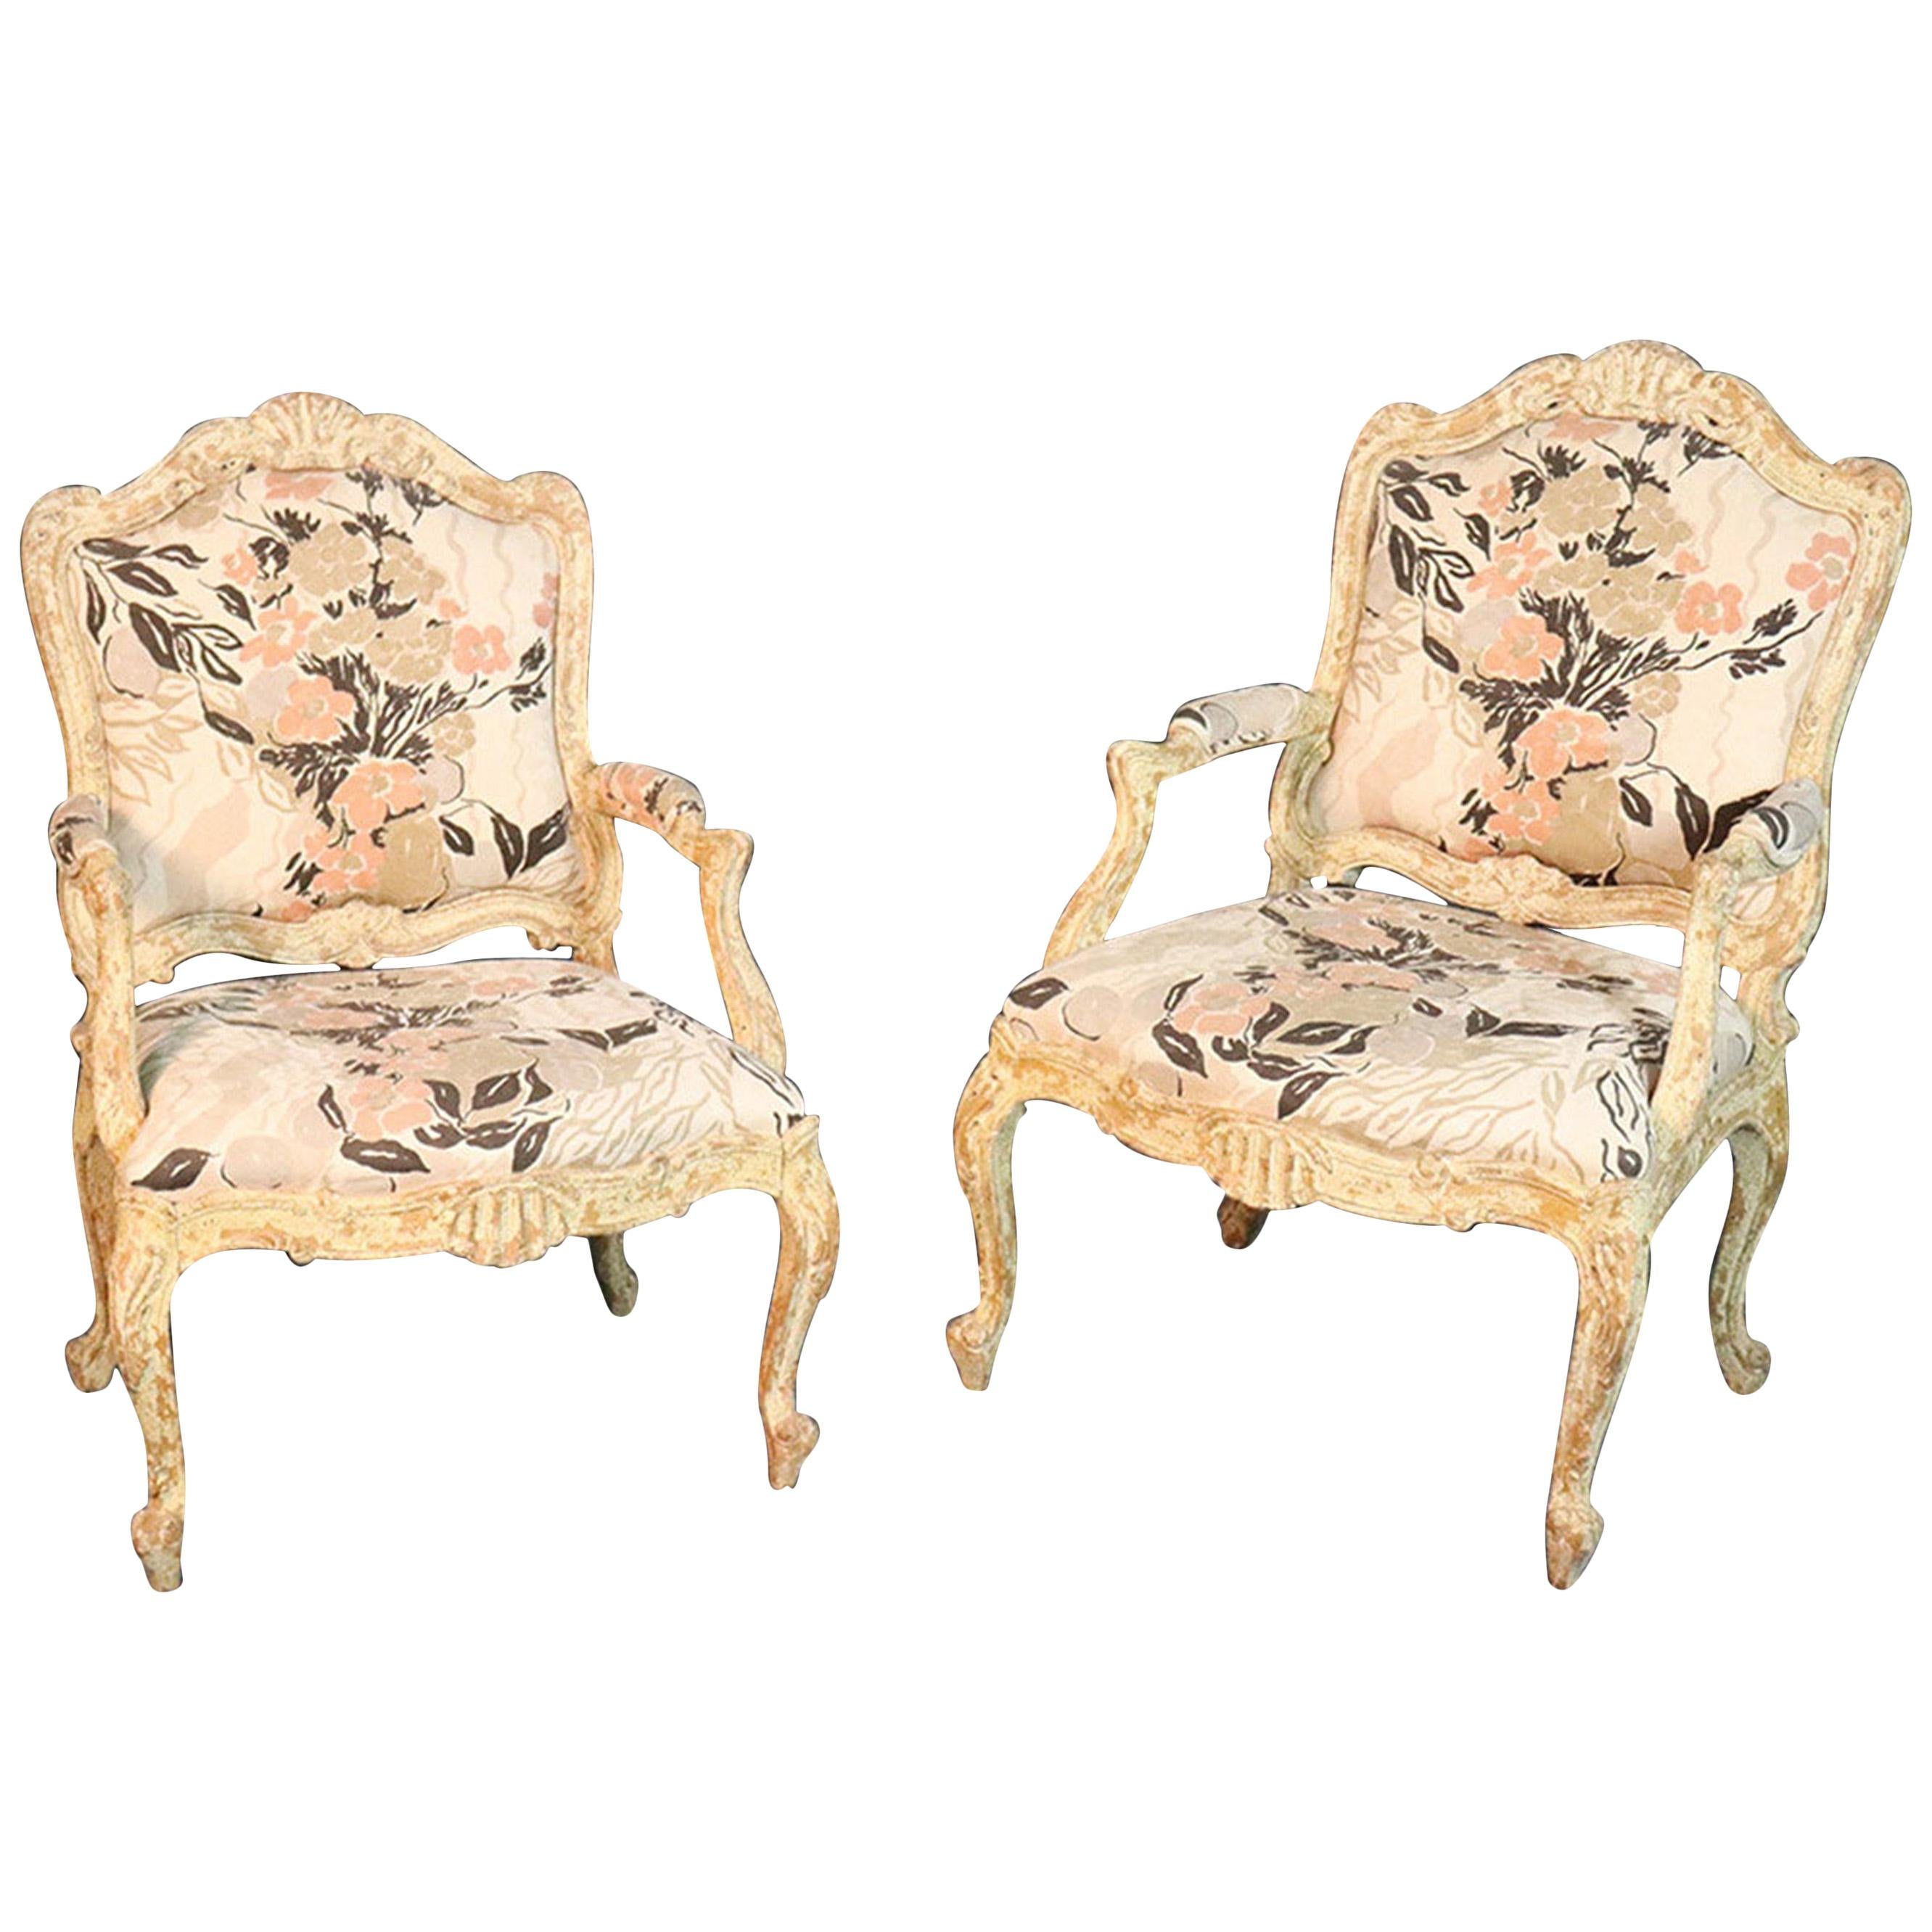 Pair of Distressed Painted French Louis XV Open Arm Bergère Fauteuil Chairs